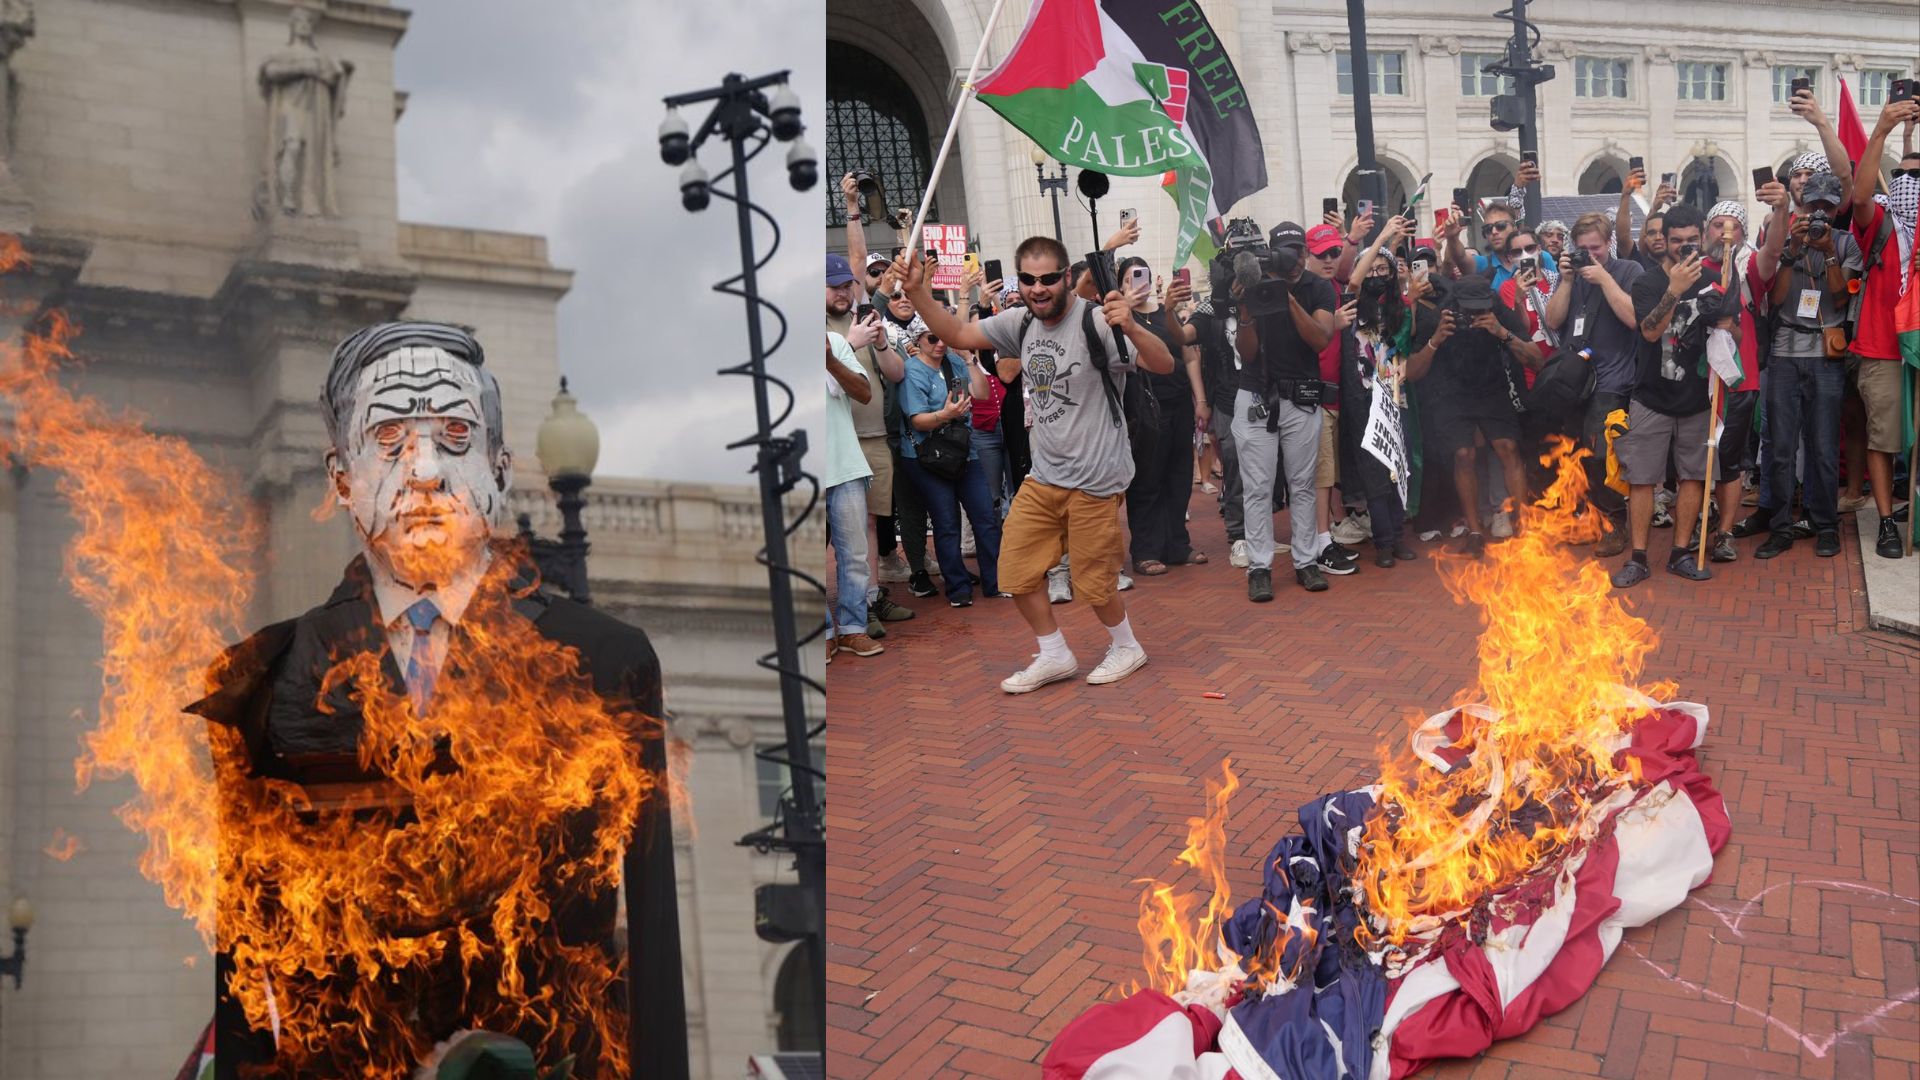 Watch: Protesters Burn US Flags and Clash with Police During Netanyahu’s Washington Visit